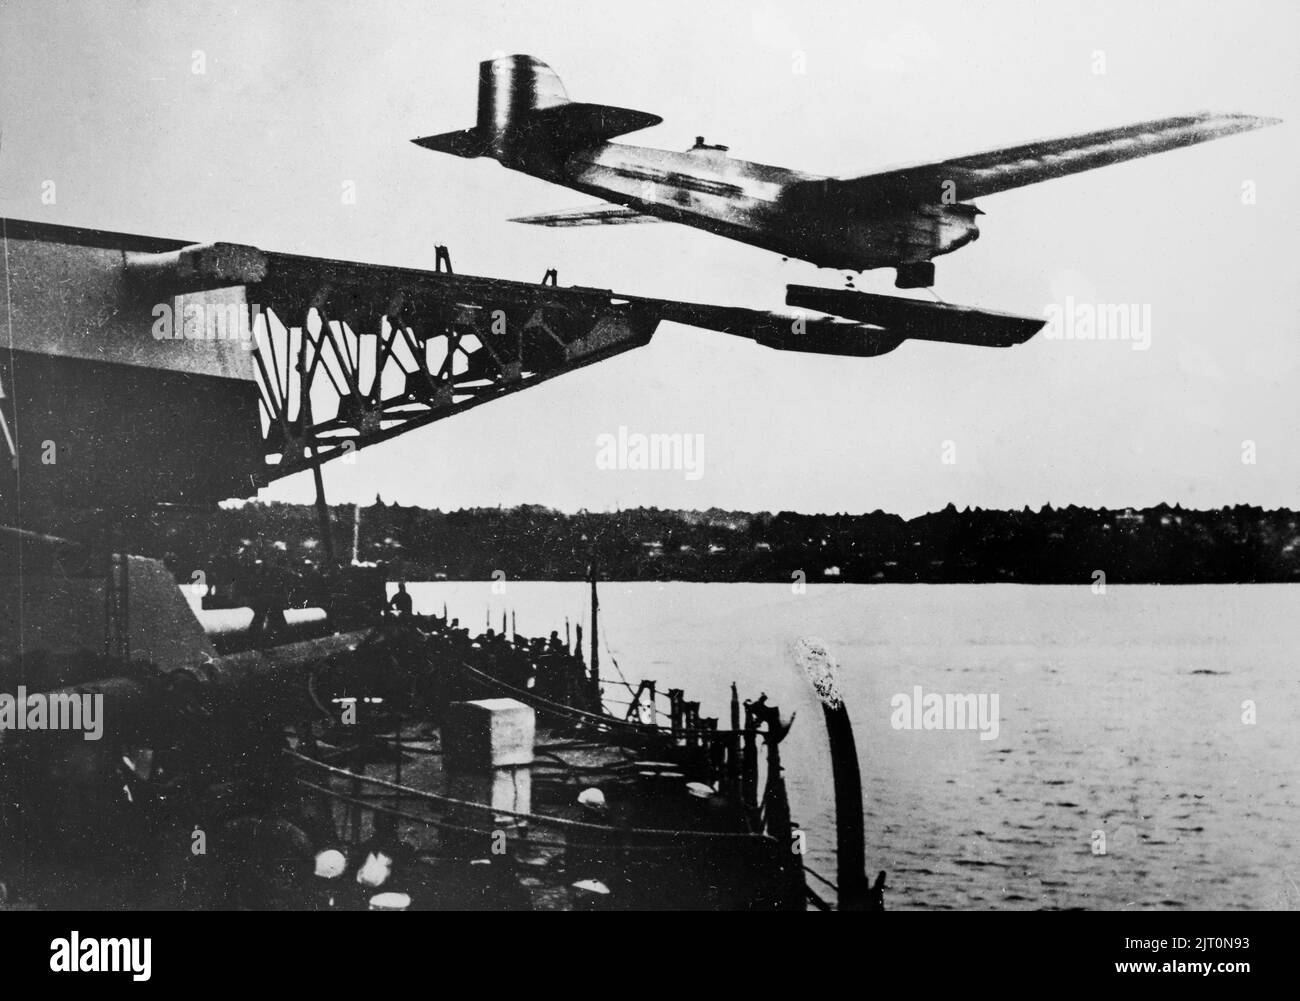 An early 1930s vintage black and white photograph showing Italian Macchi M.C.72 Seaplane being launched. Stock Photo